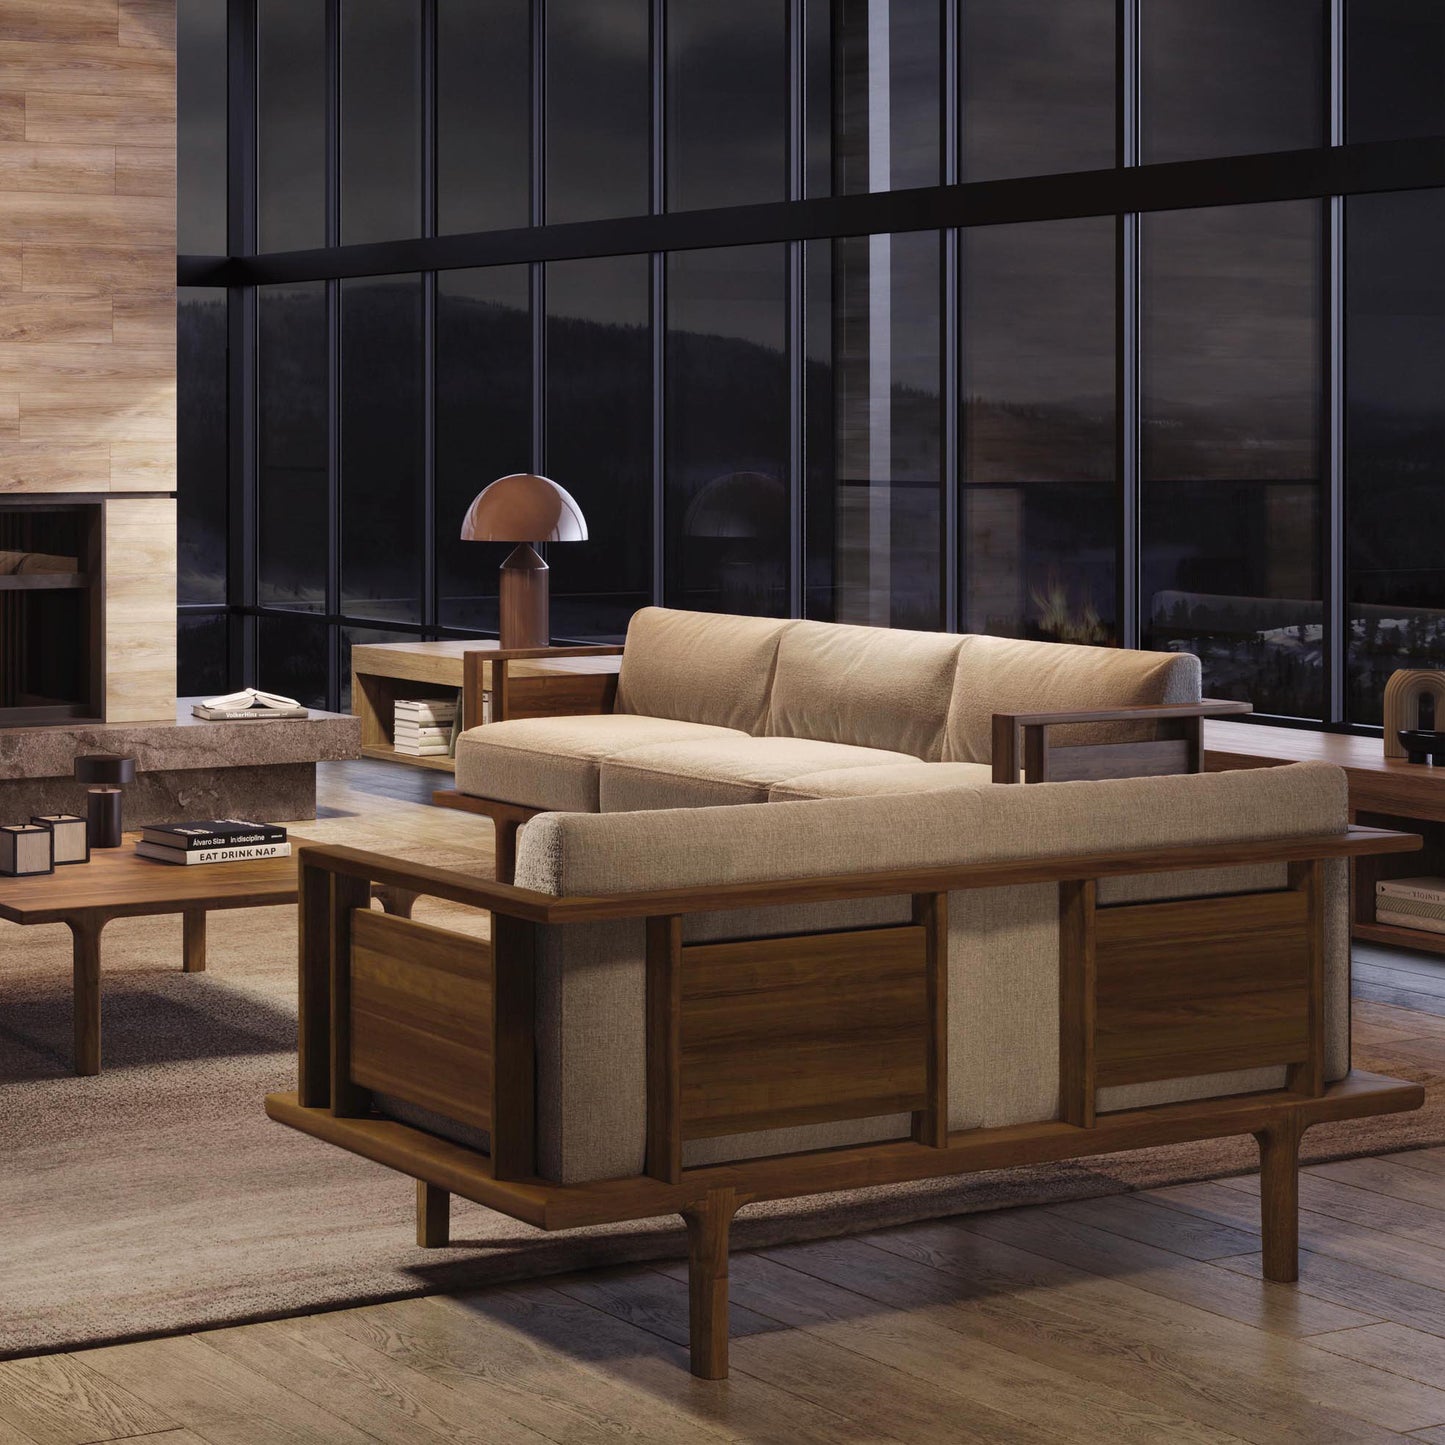 A modern living room featuring a Copeland Furniture Sierra Walnut Upholstered Sofa, a matching coffee table by Copeland Furniture, a side table with a lamp, and a hardwood floor.